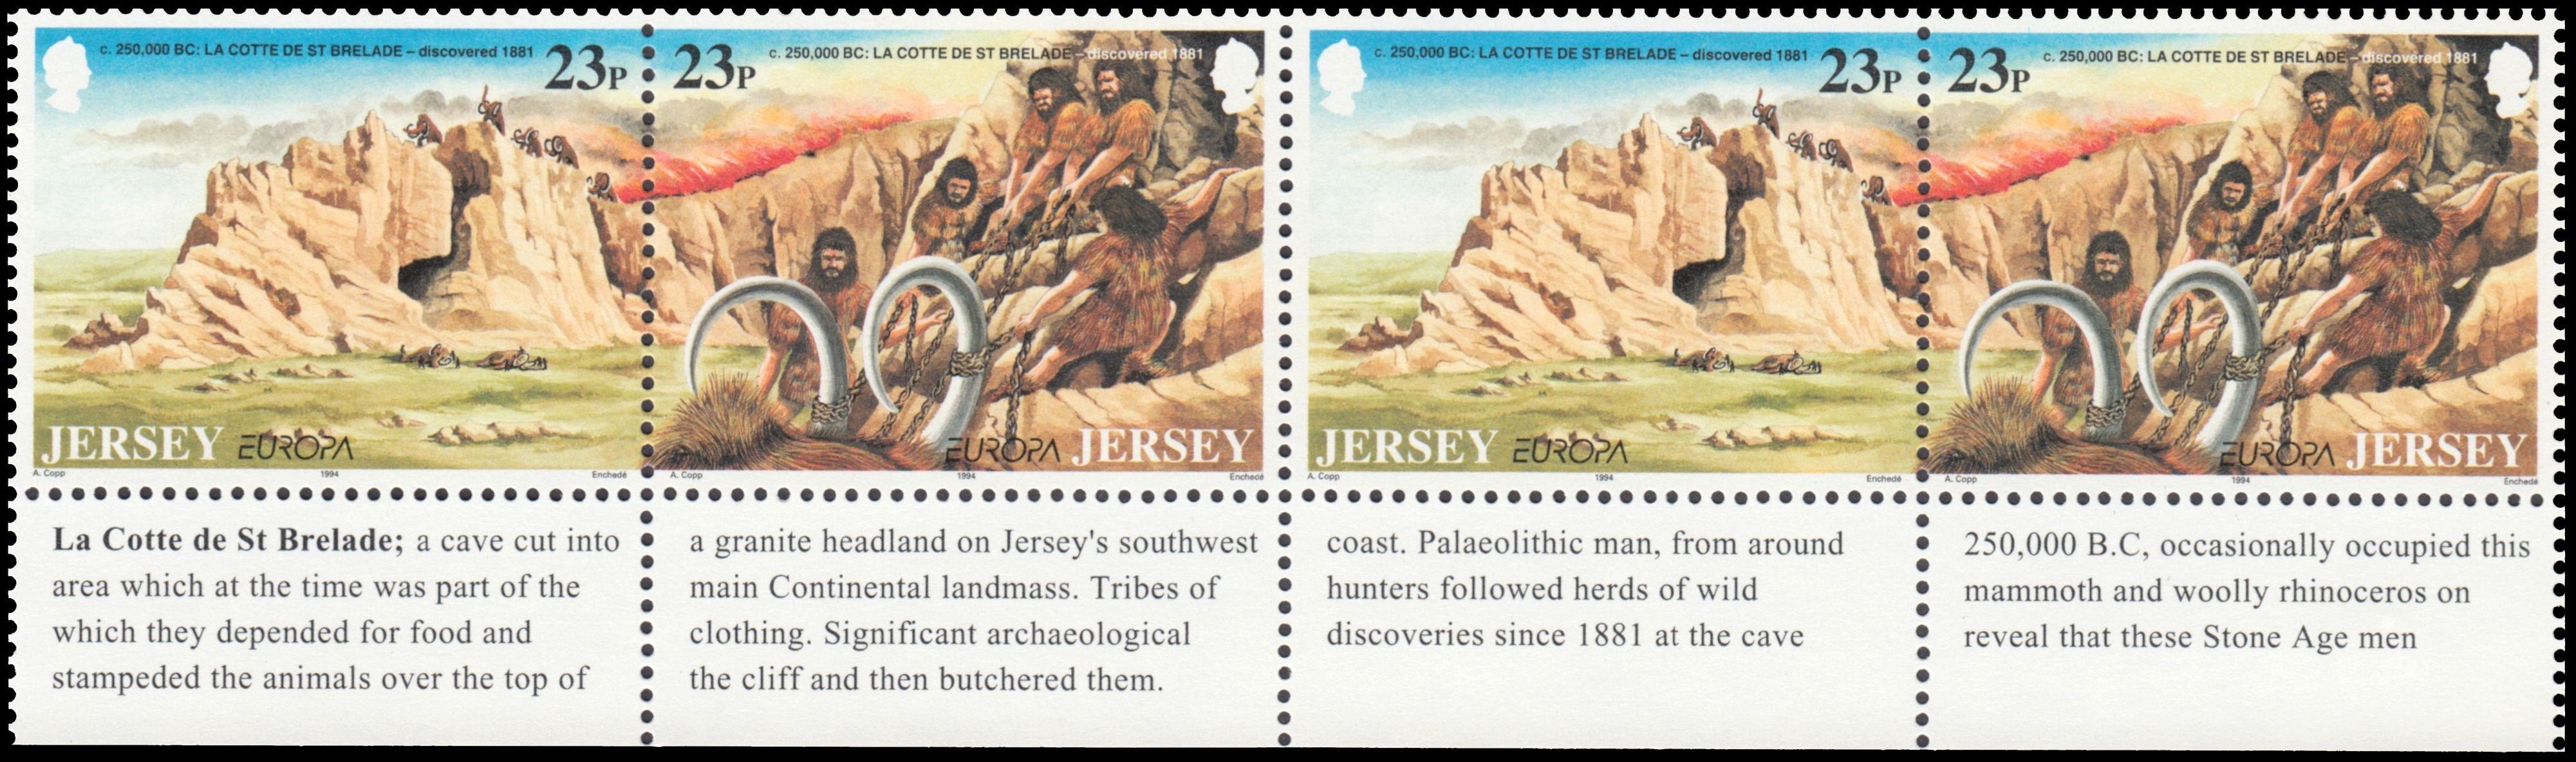 Prehistoric animals and Neandertal on stamps of Jersey 1994